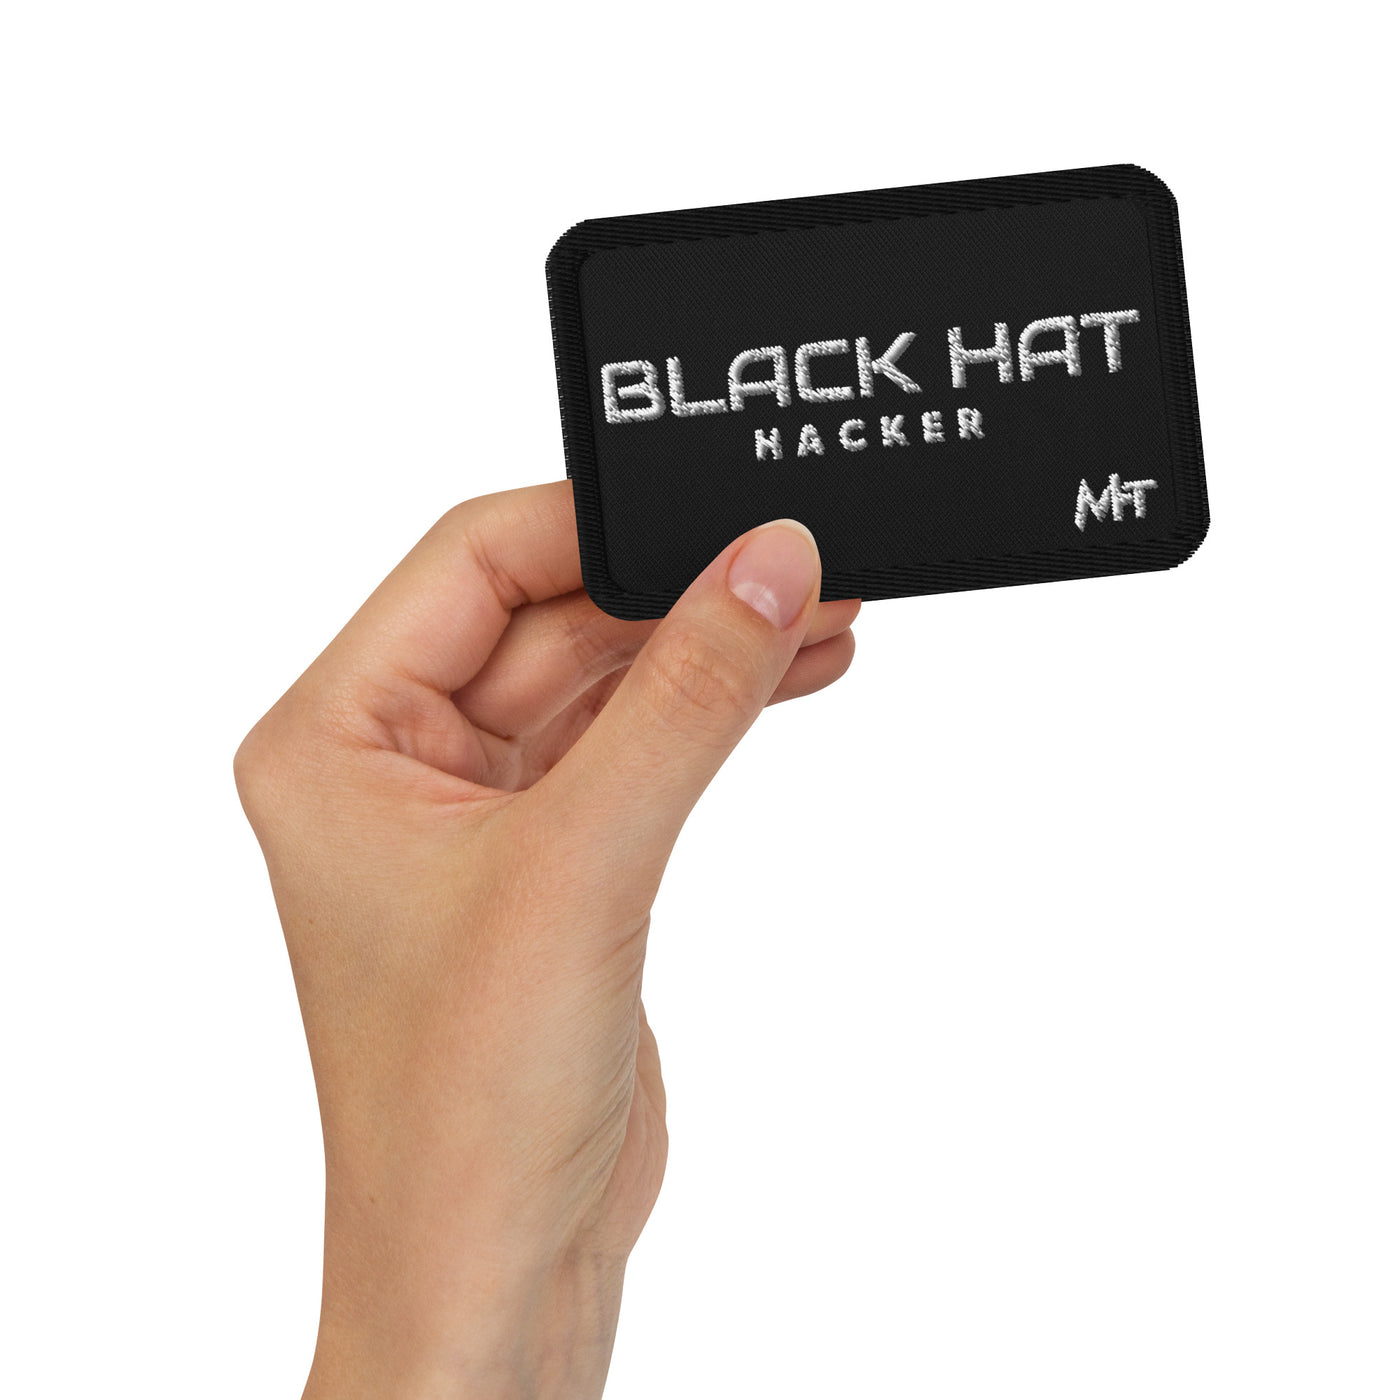 Black Hat Hacker V14 - Embroidered patches